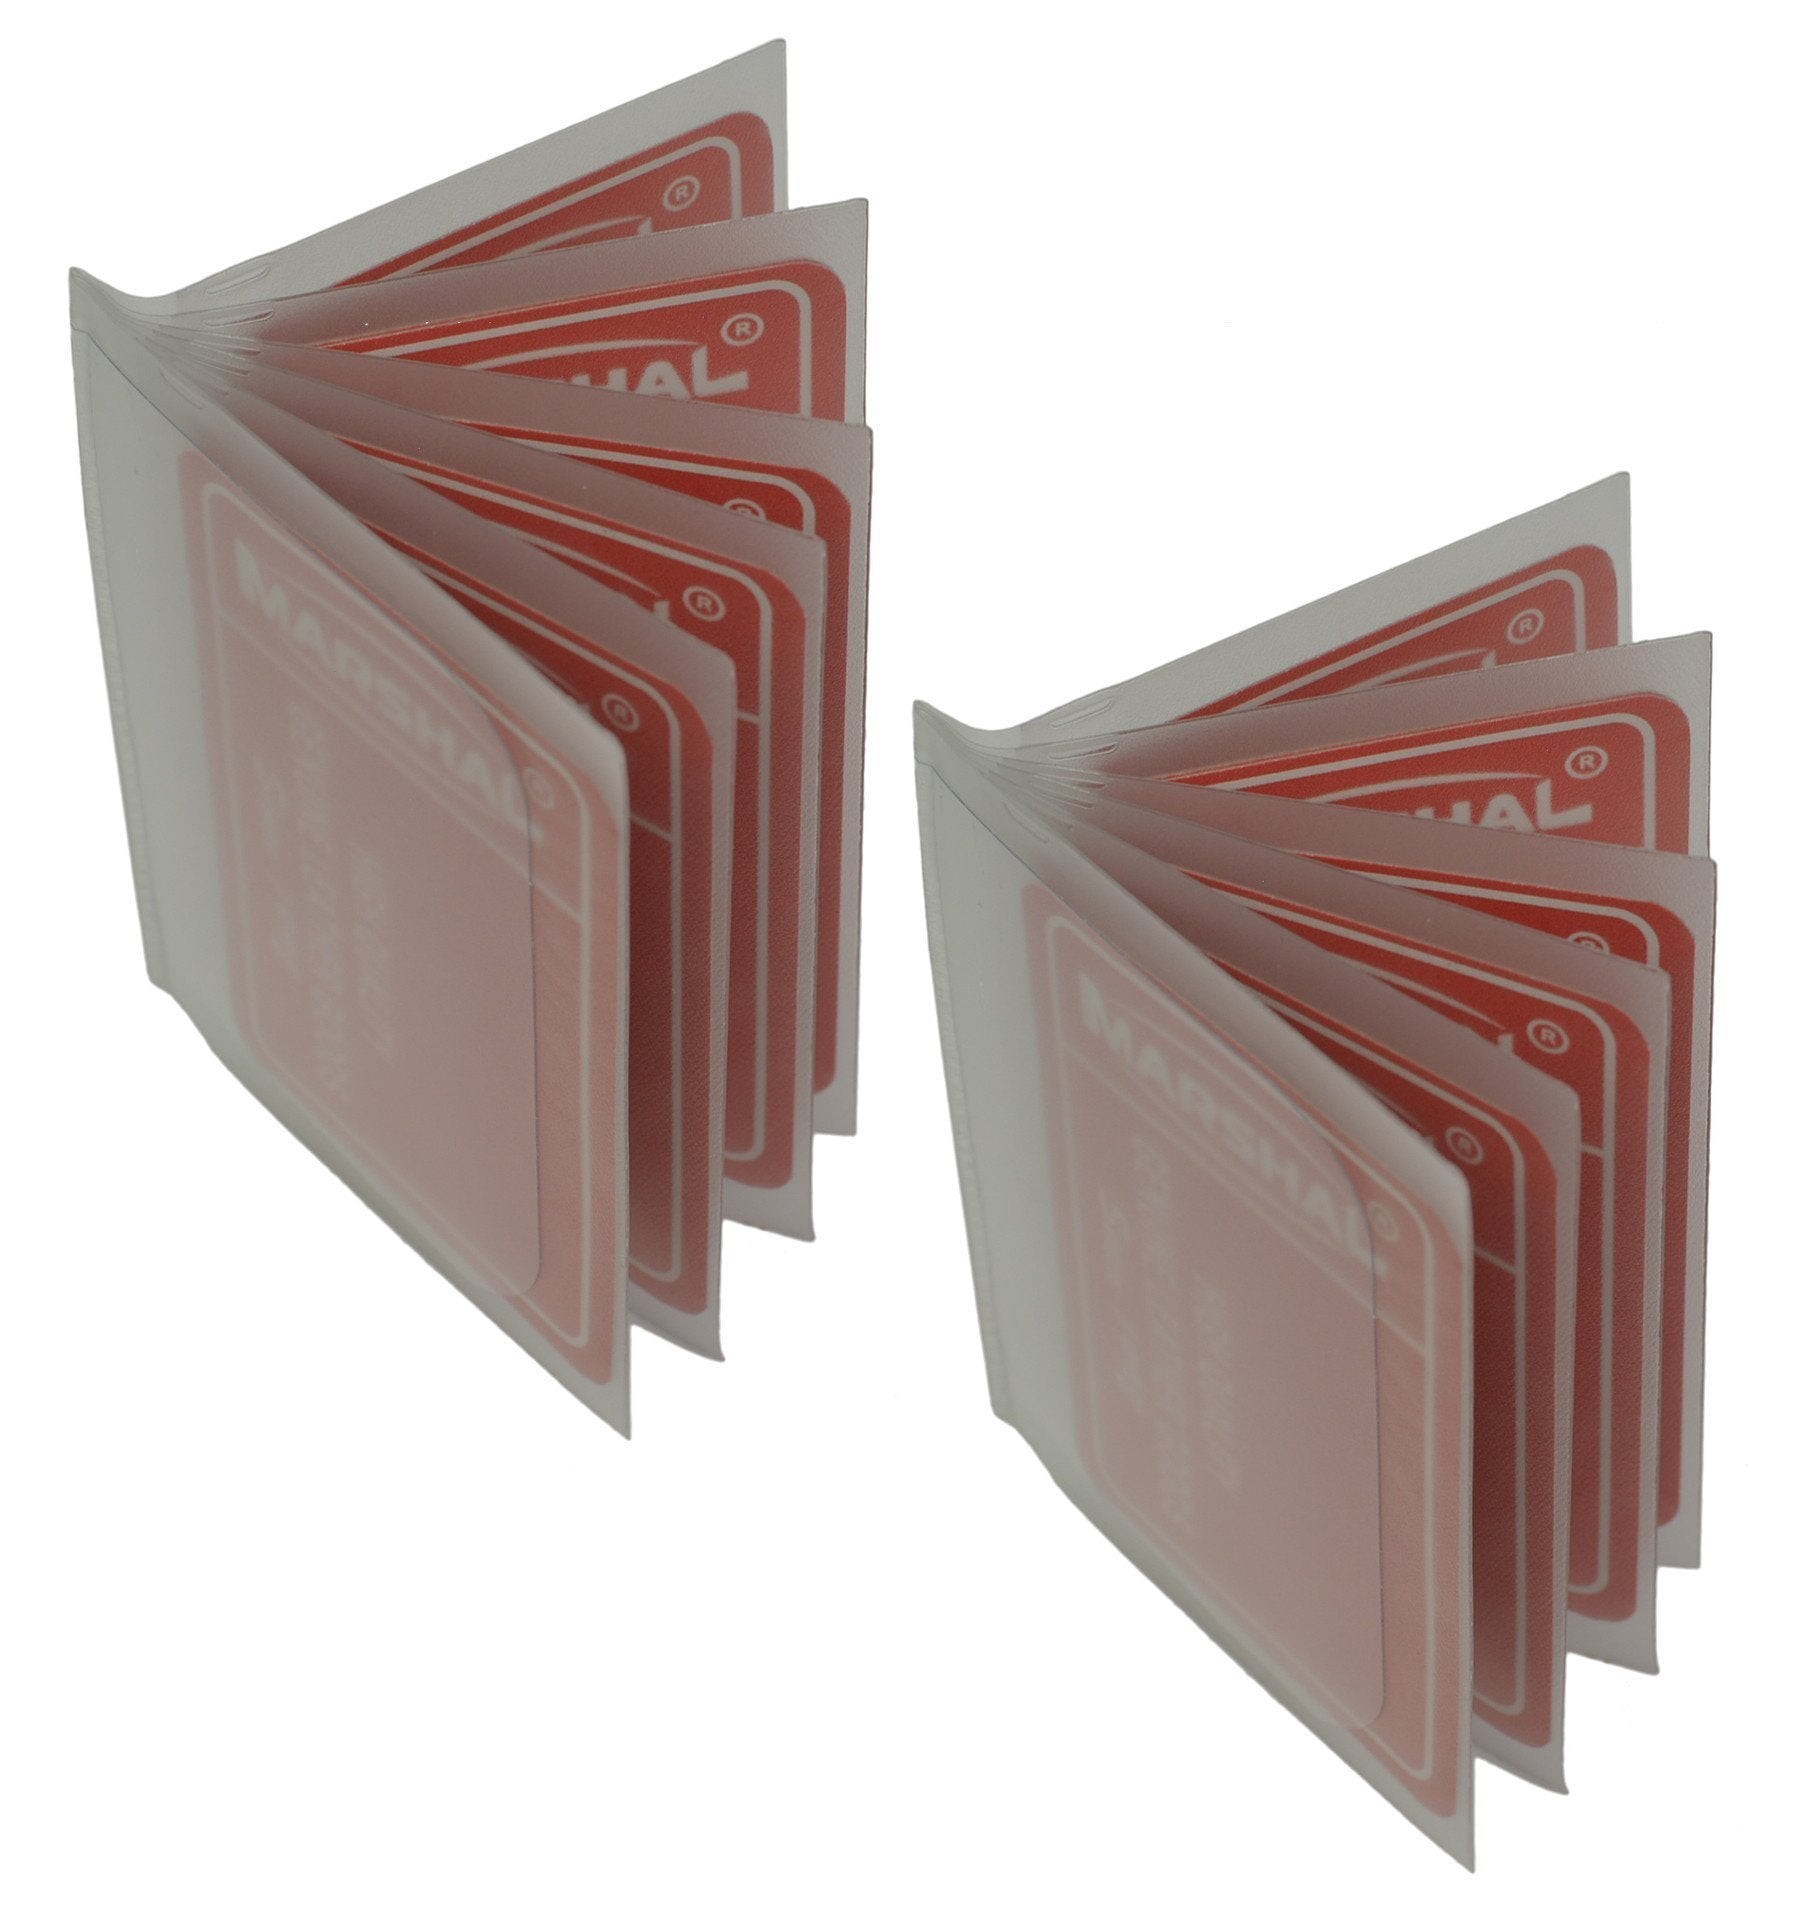 SET of 2 - 6 Page Plastic Wallet for Bifold Billfold or Trifolds Top Load INSTRI 6PGS - Walmart.com